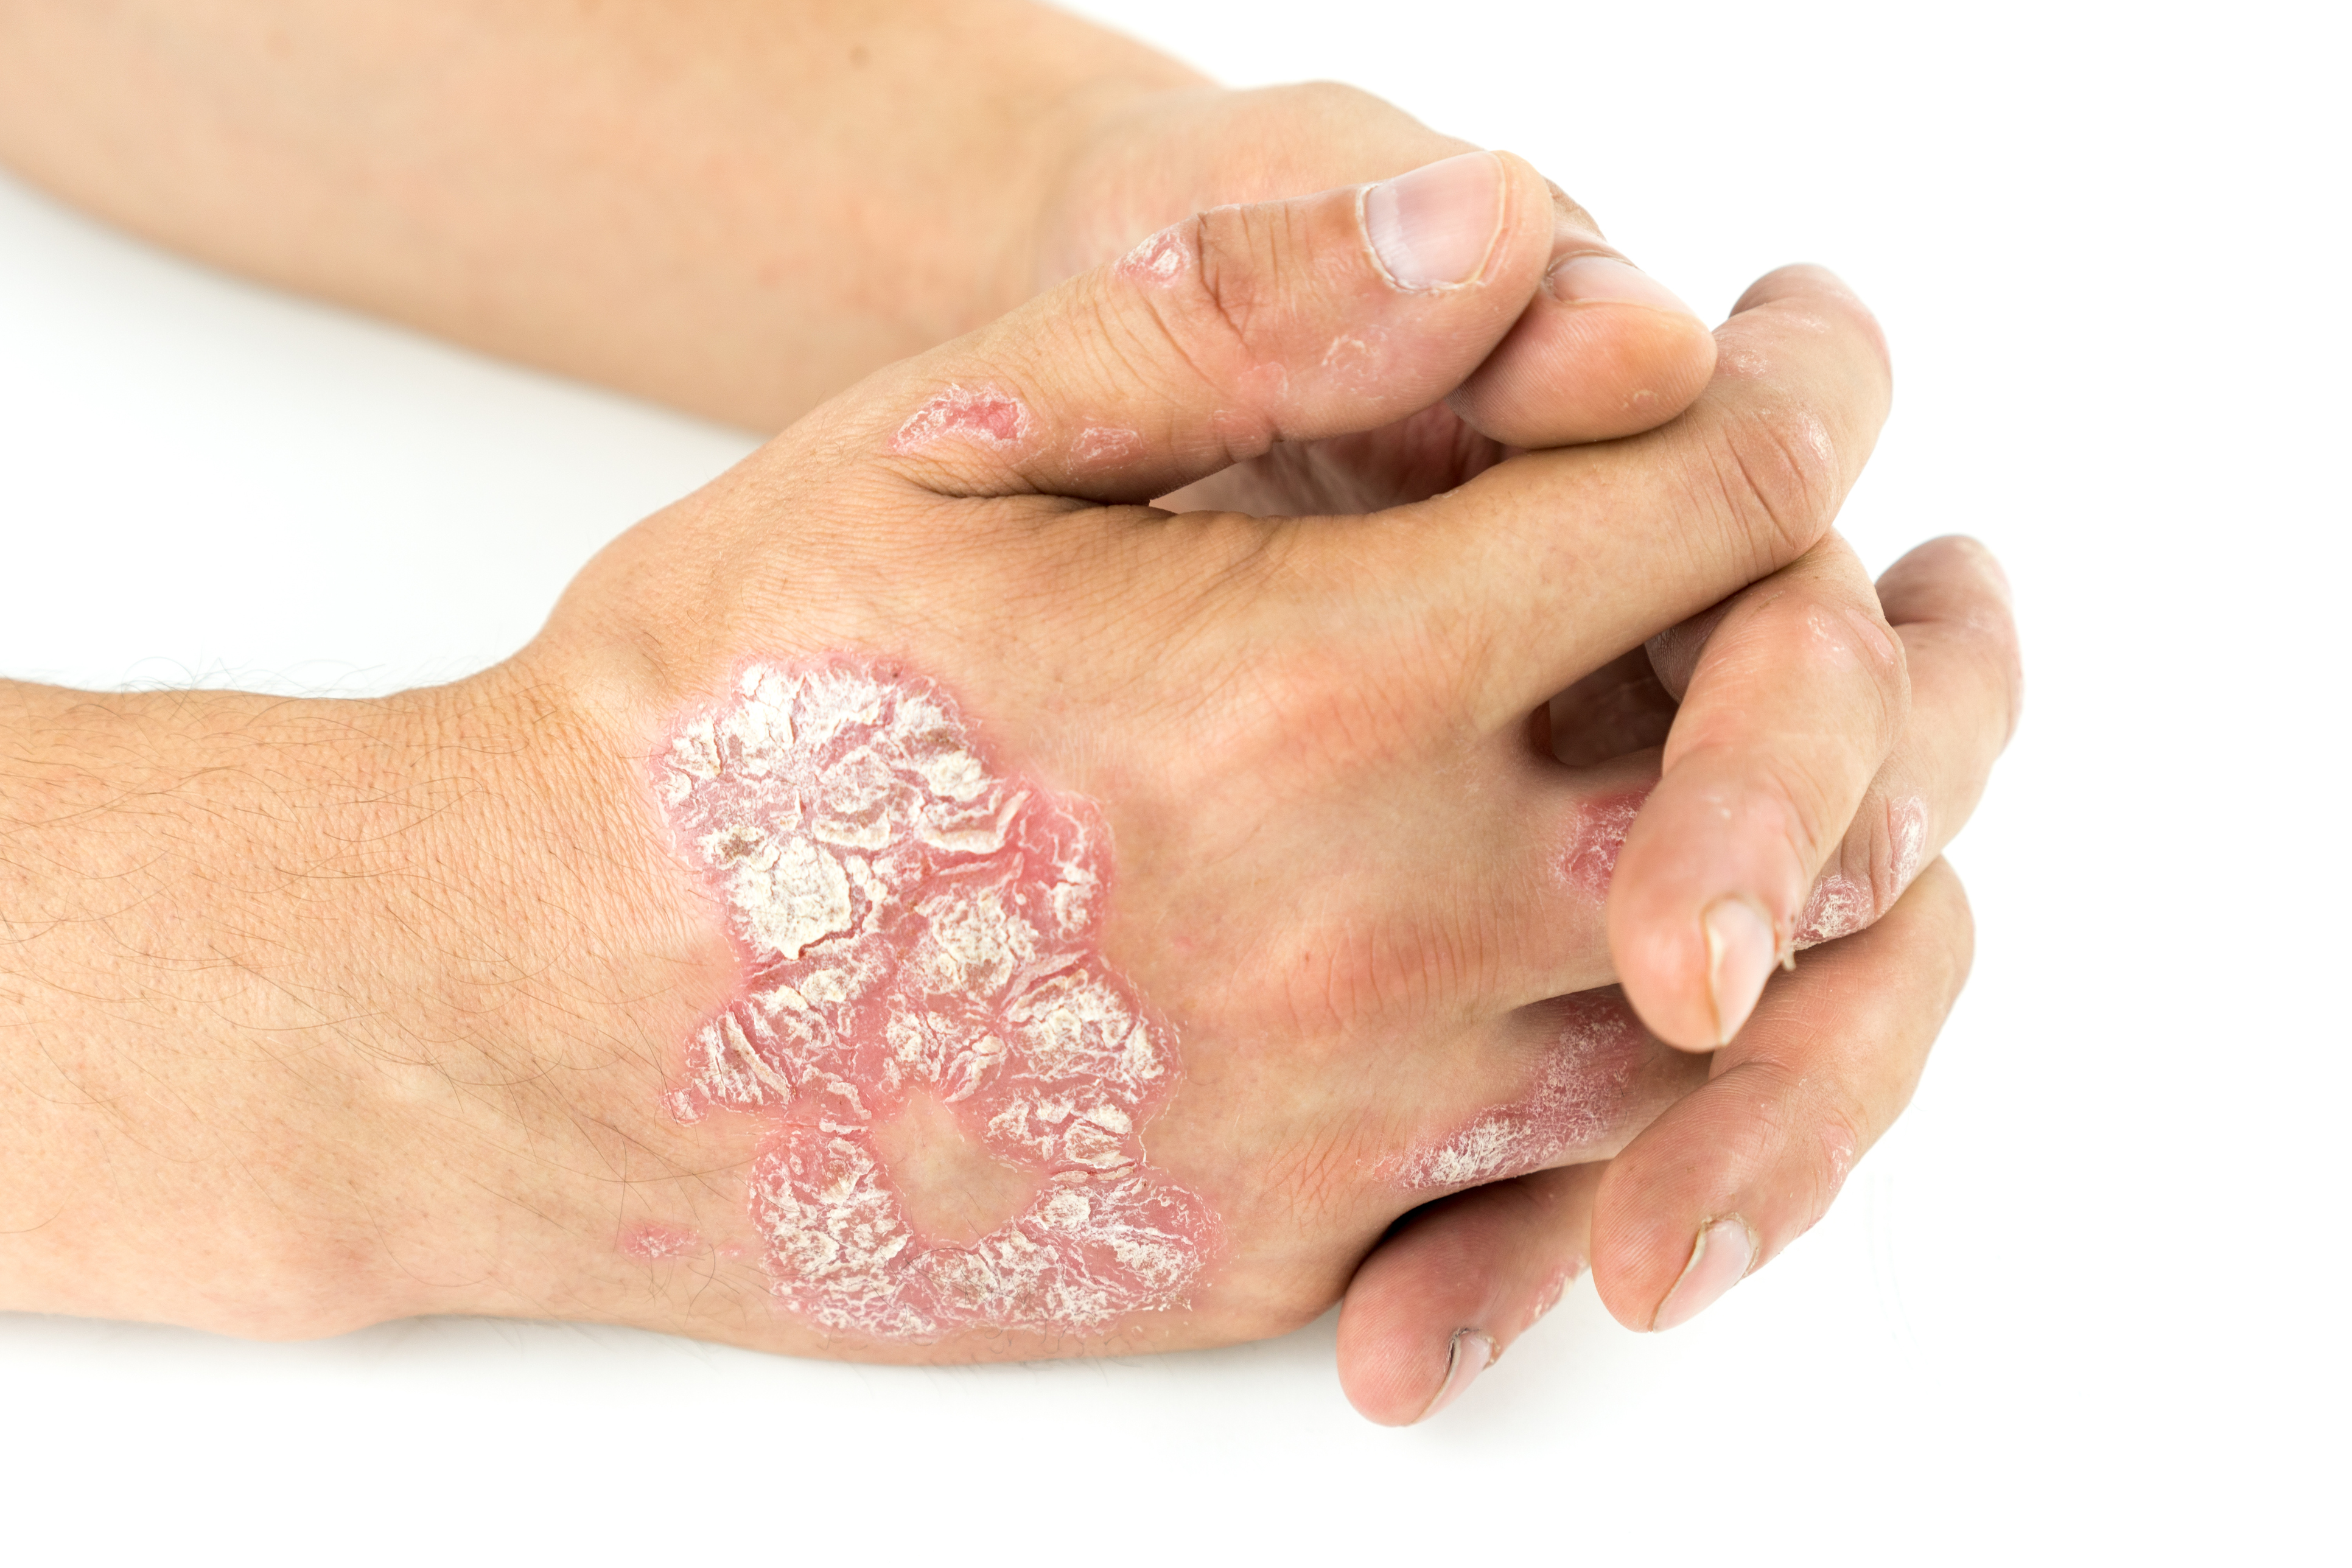 Psoriasis vulgaris on the male hands with plaque, rash and patches, isolated on white background. Autoimmune genetic disease.